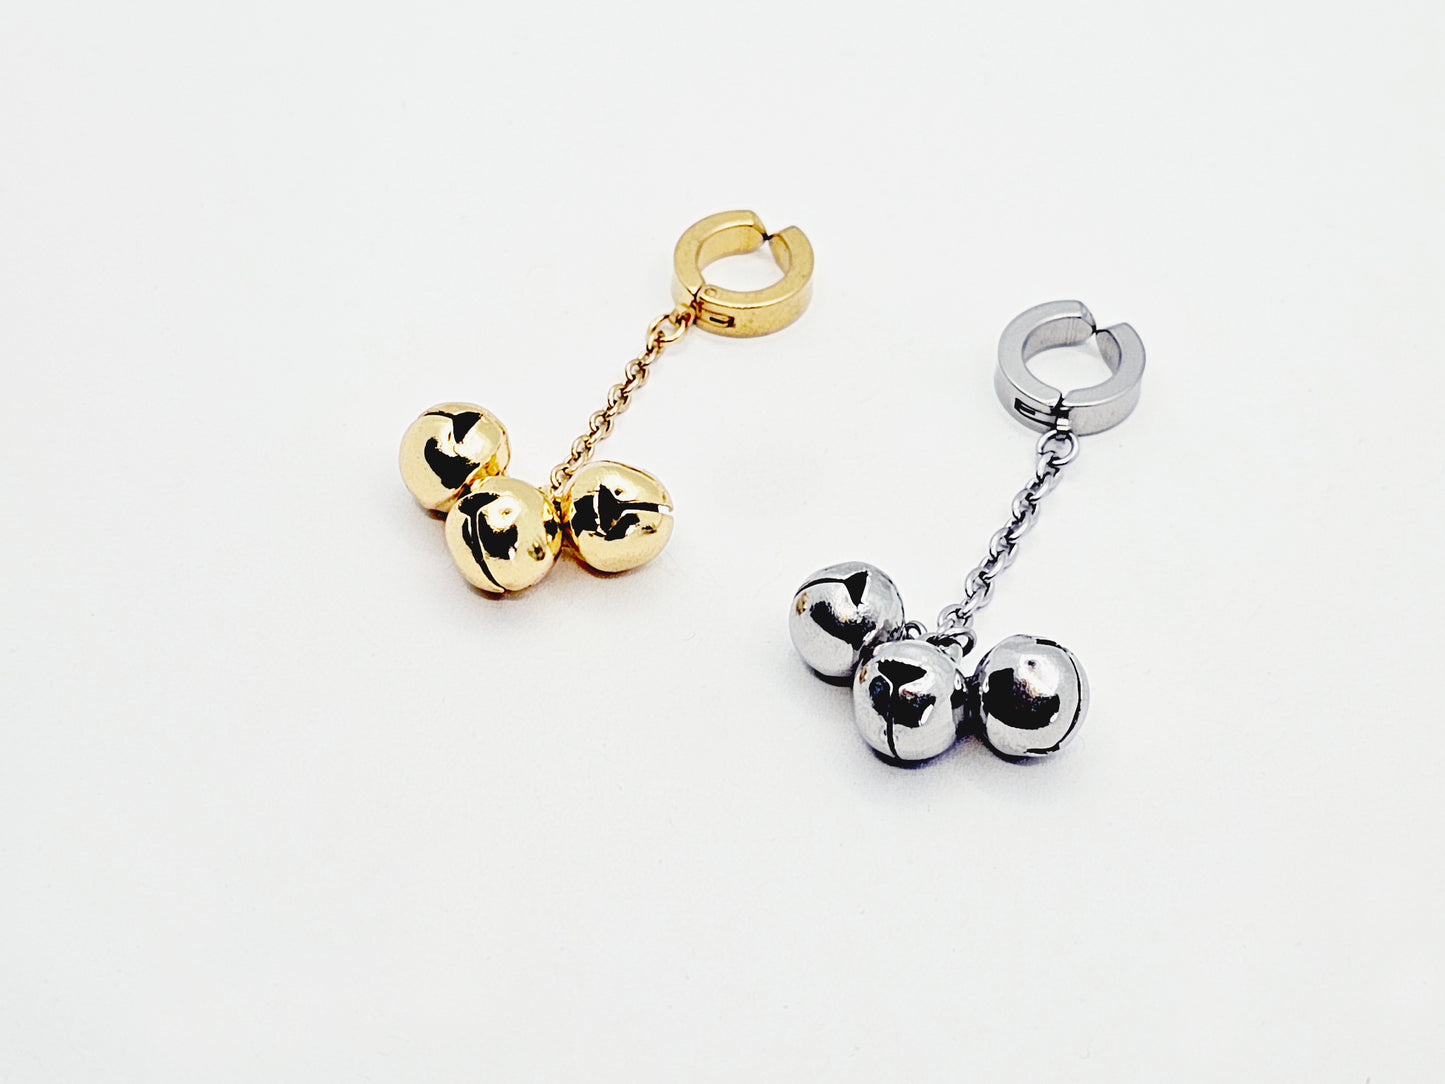 Genital Jewelry Clip with Bells, Stainless Steel. In Gold or Silver. Non Piercing Clitoral Jewelry.